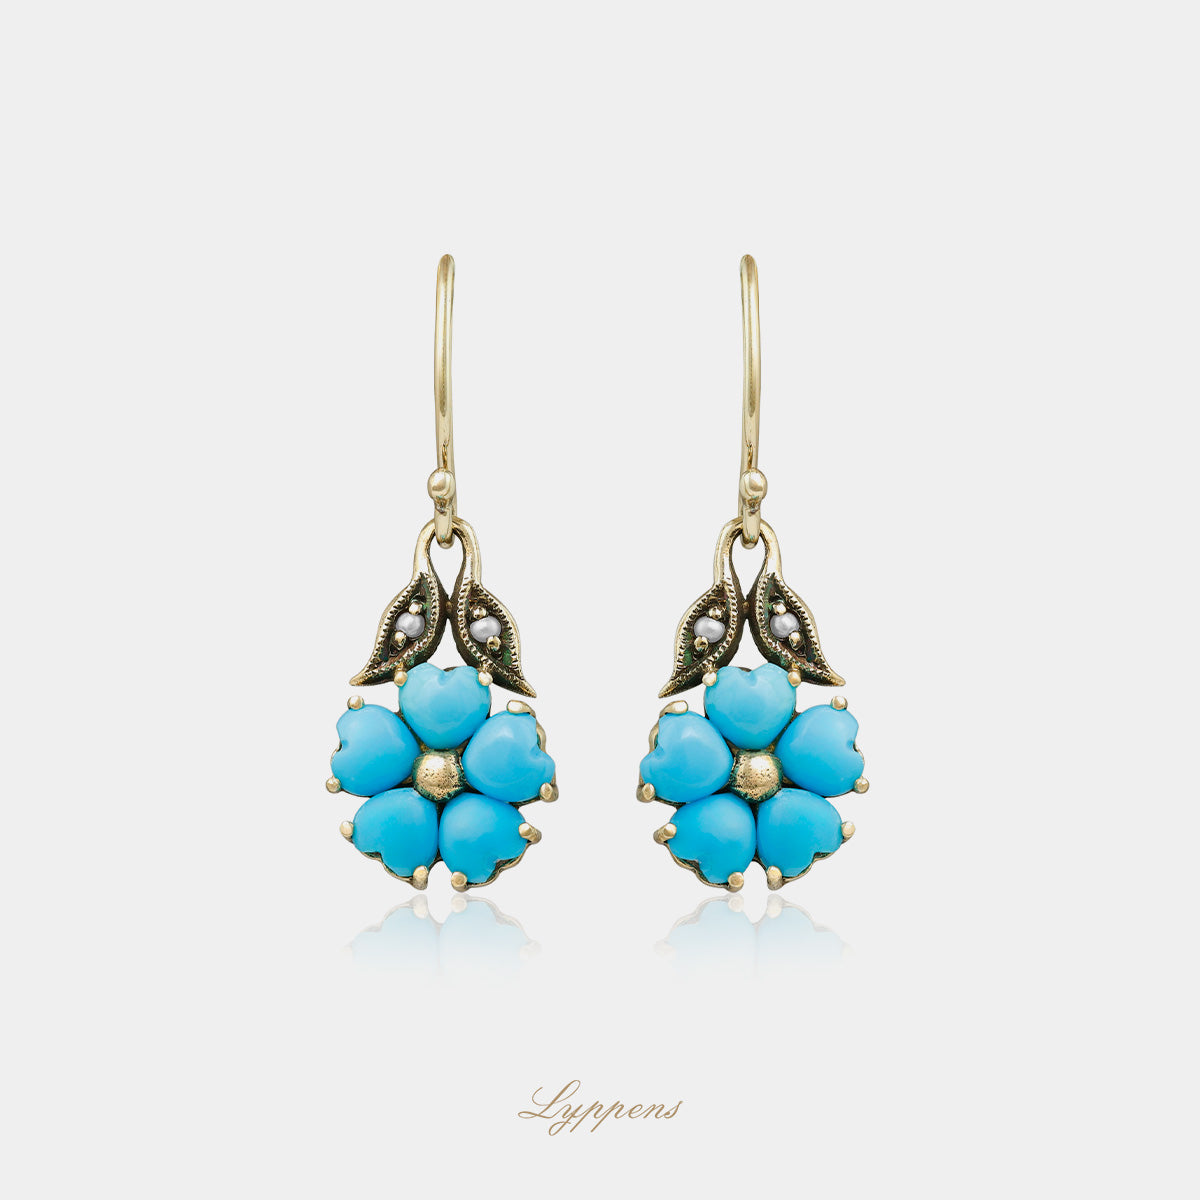 Yellow gold drop earrings with turquoise and pearls